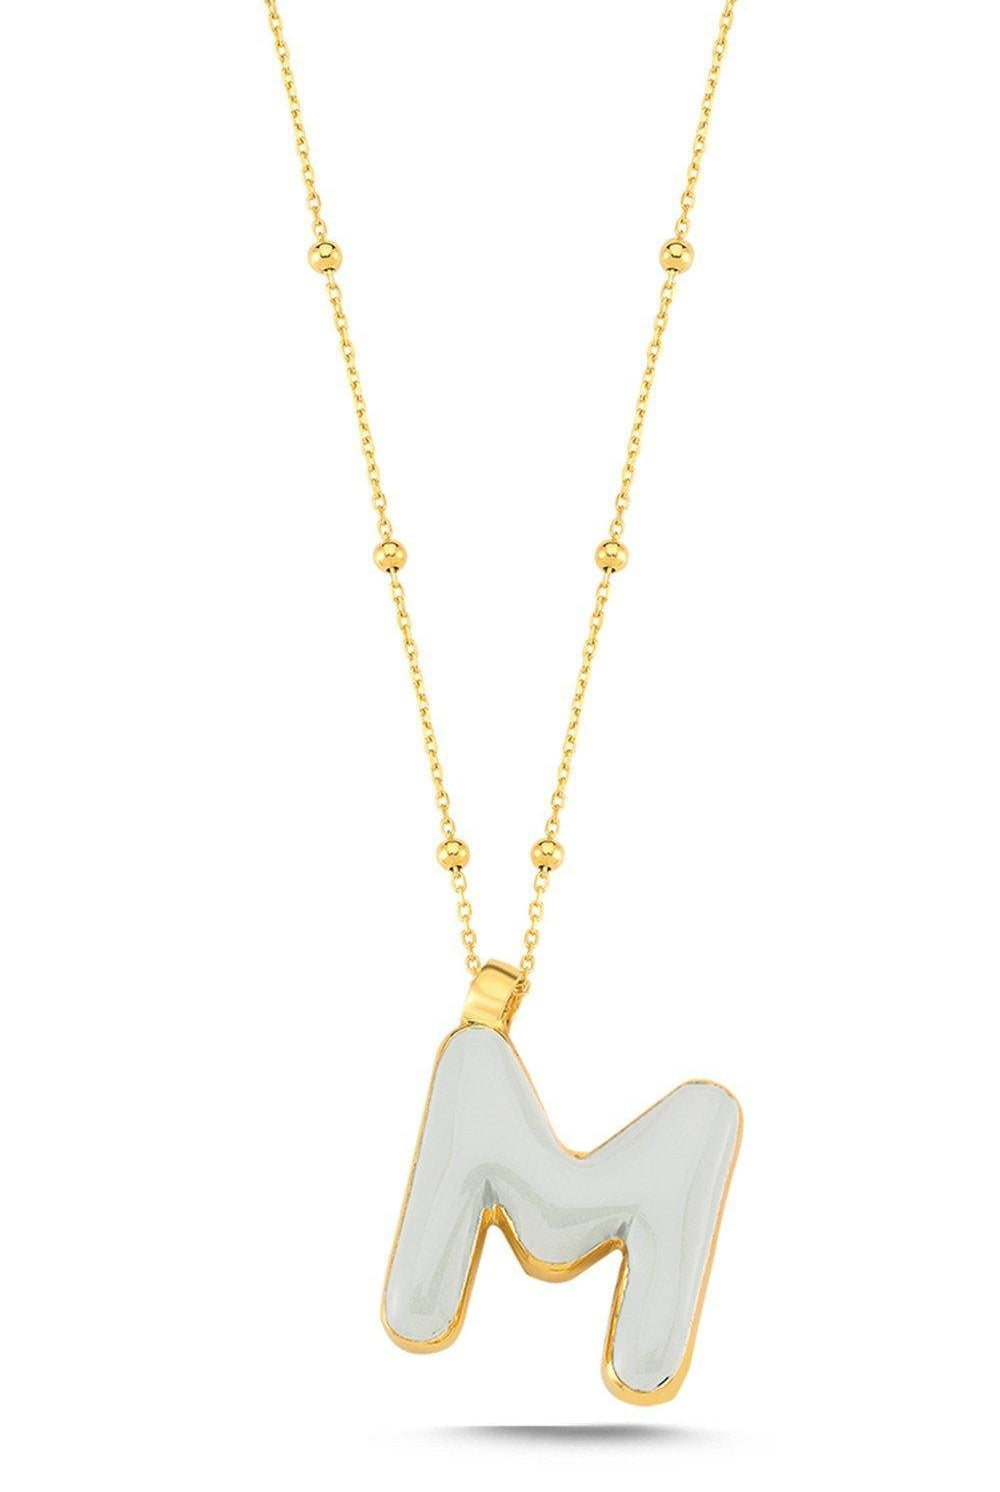 Mer's | Say My Name Necklace - Pembe C Harfi | Milagron